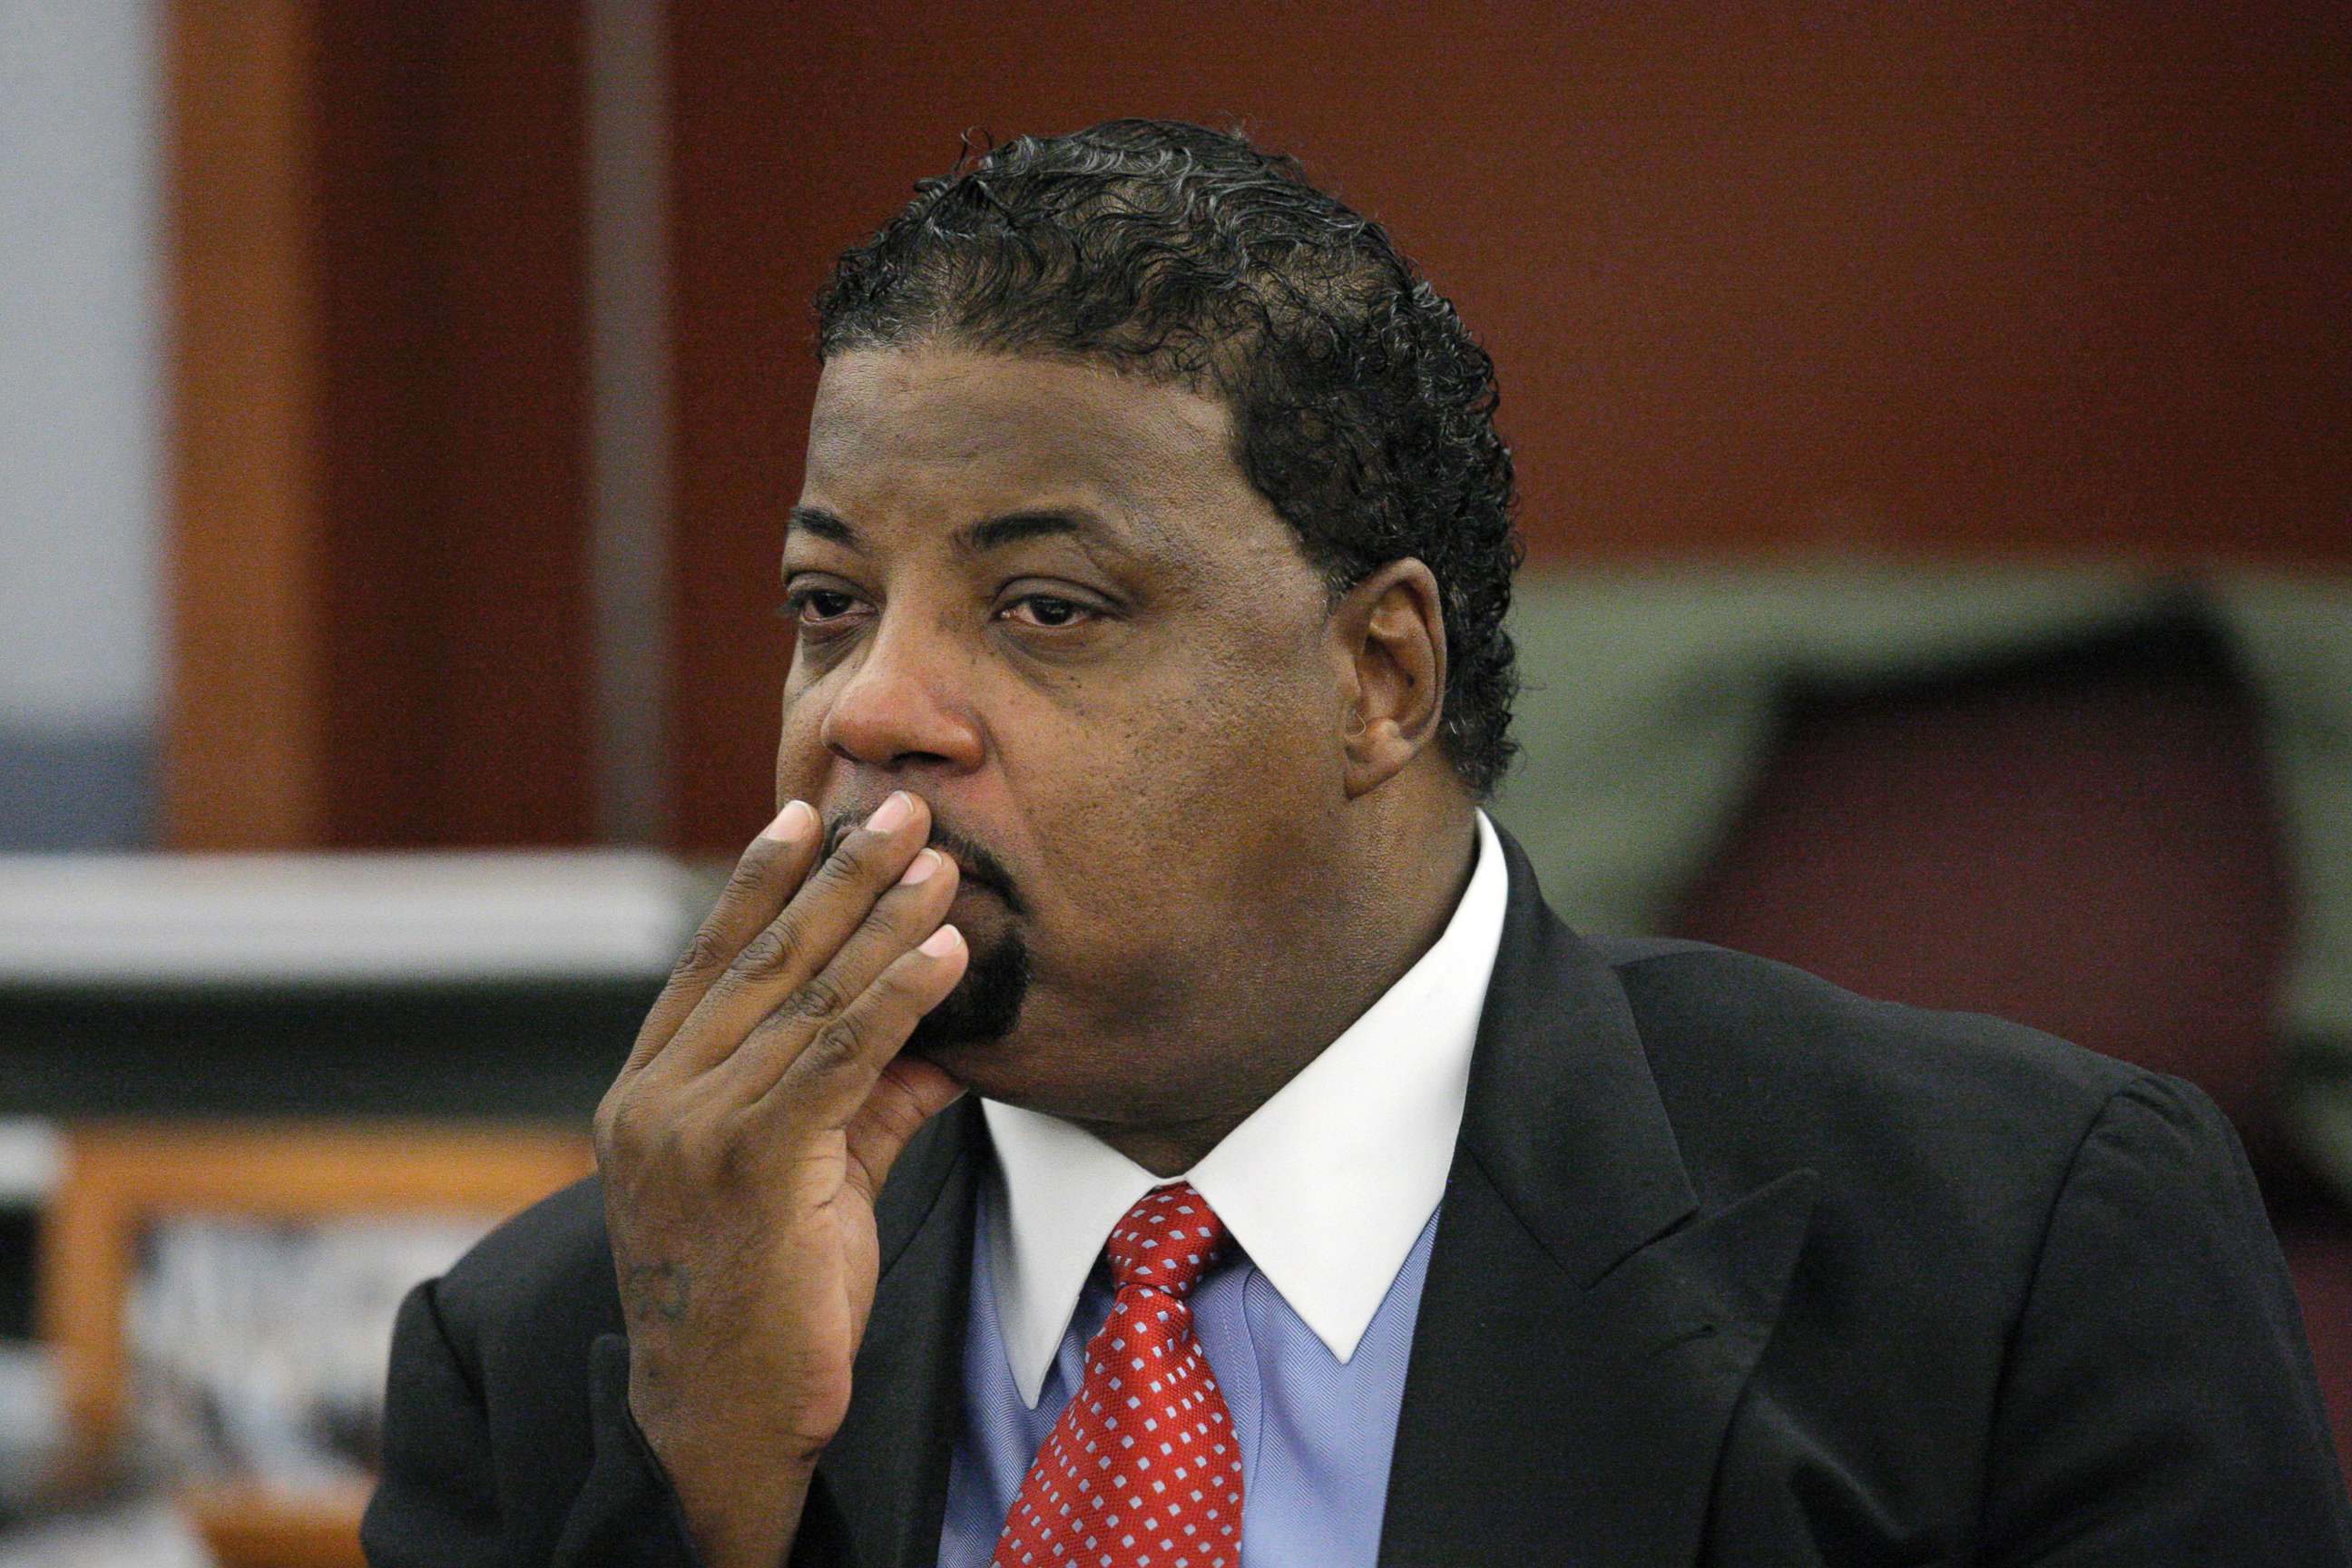 PHOTO: Co-defendant Clarence 'C.J.' Stewart attends the opening day of trial at Clark County Regional Justice Center, Sept. 15, 2008, in Las Vegas, Nevada.